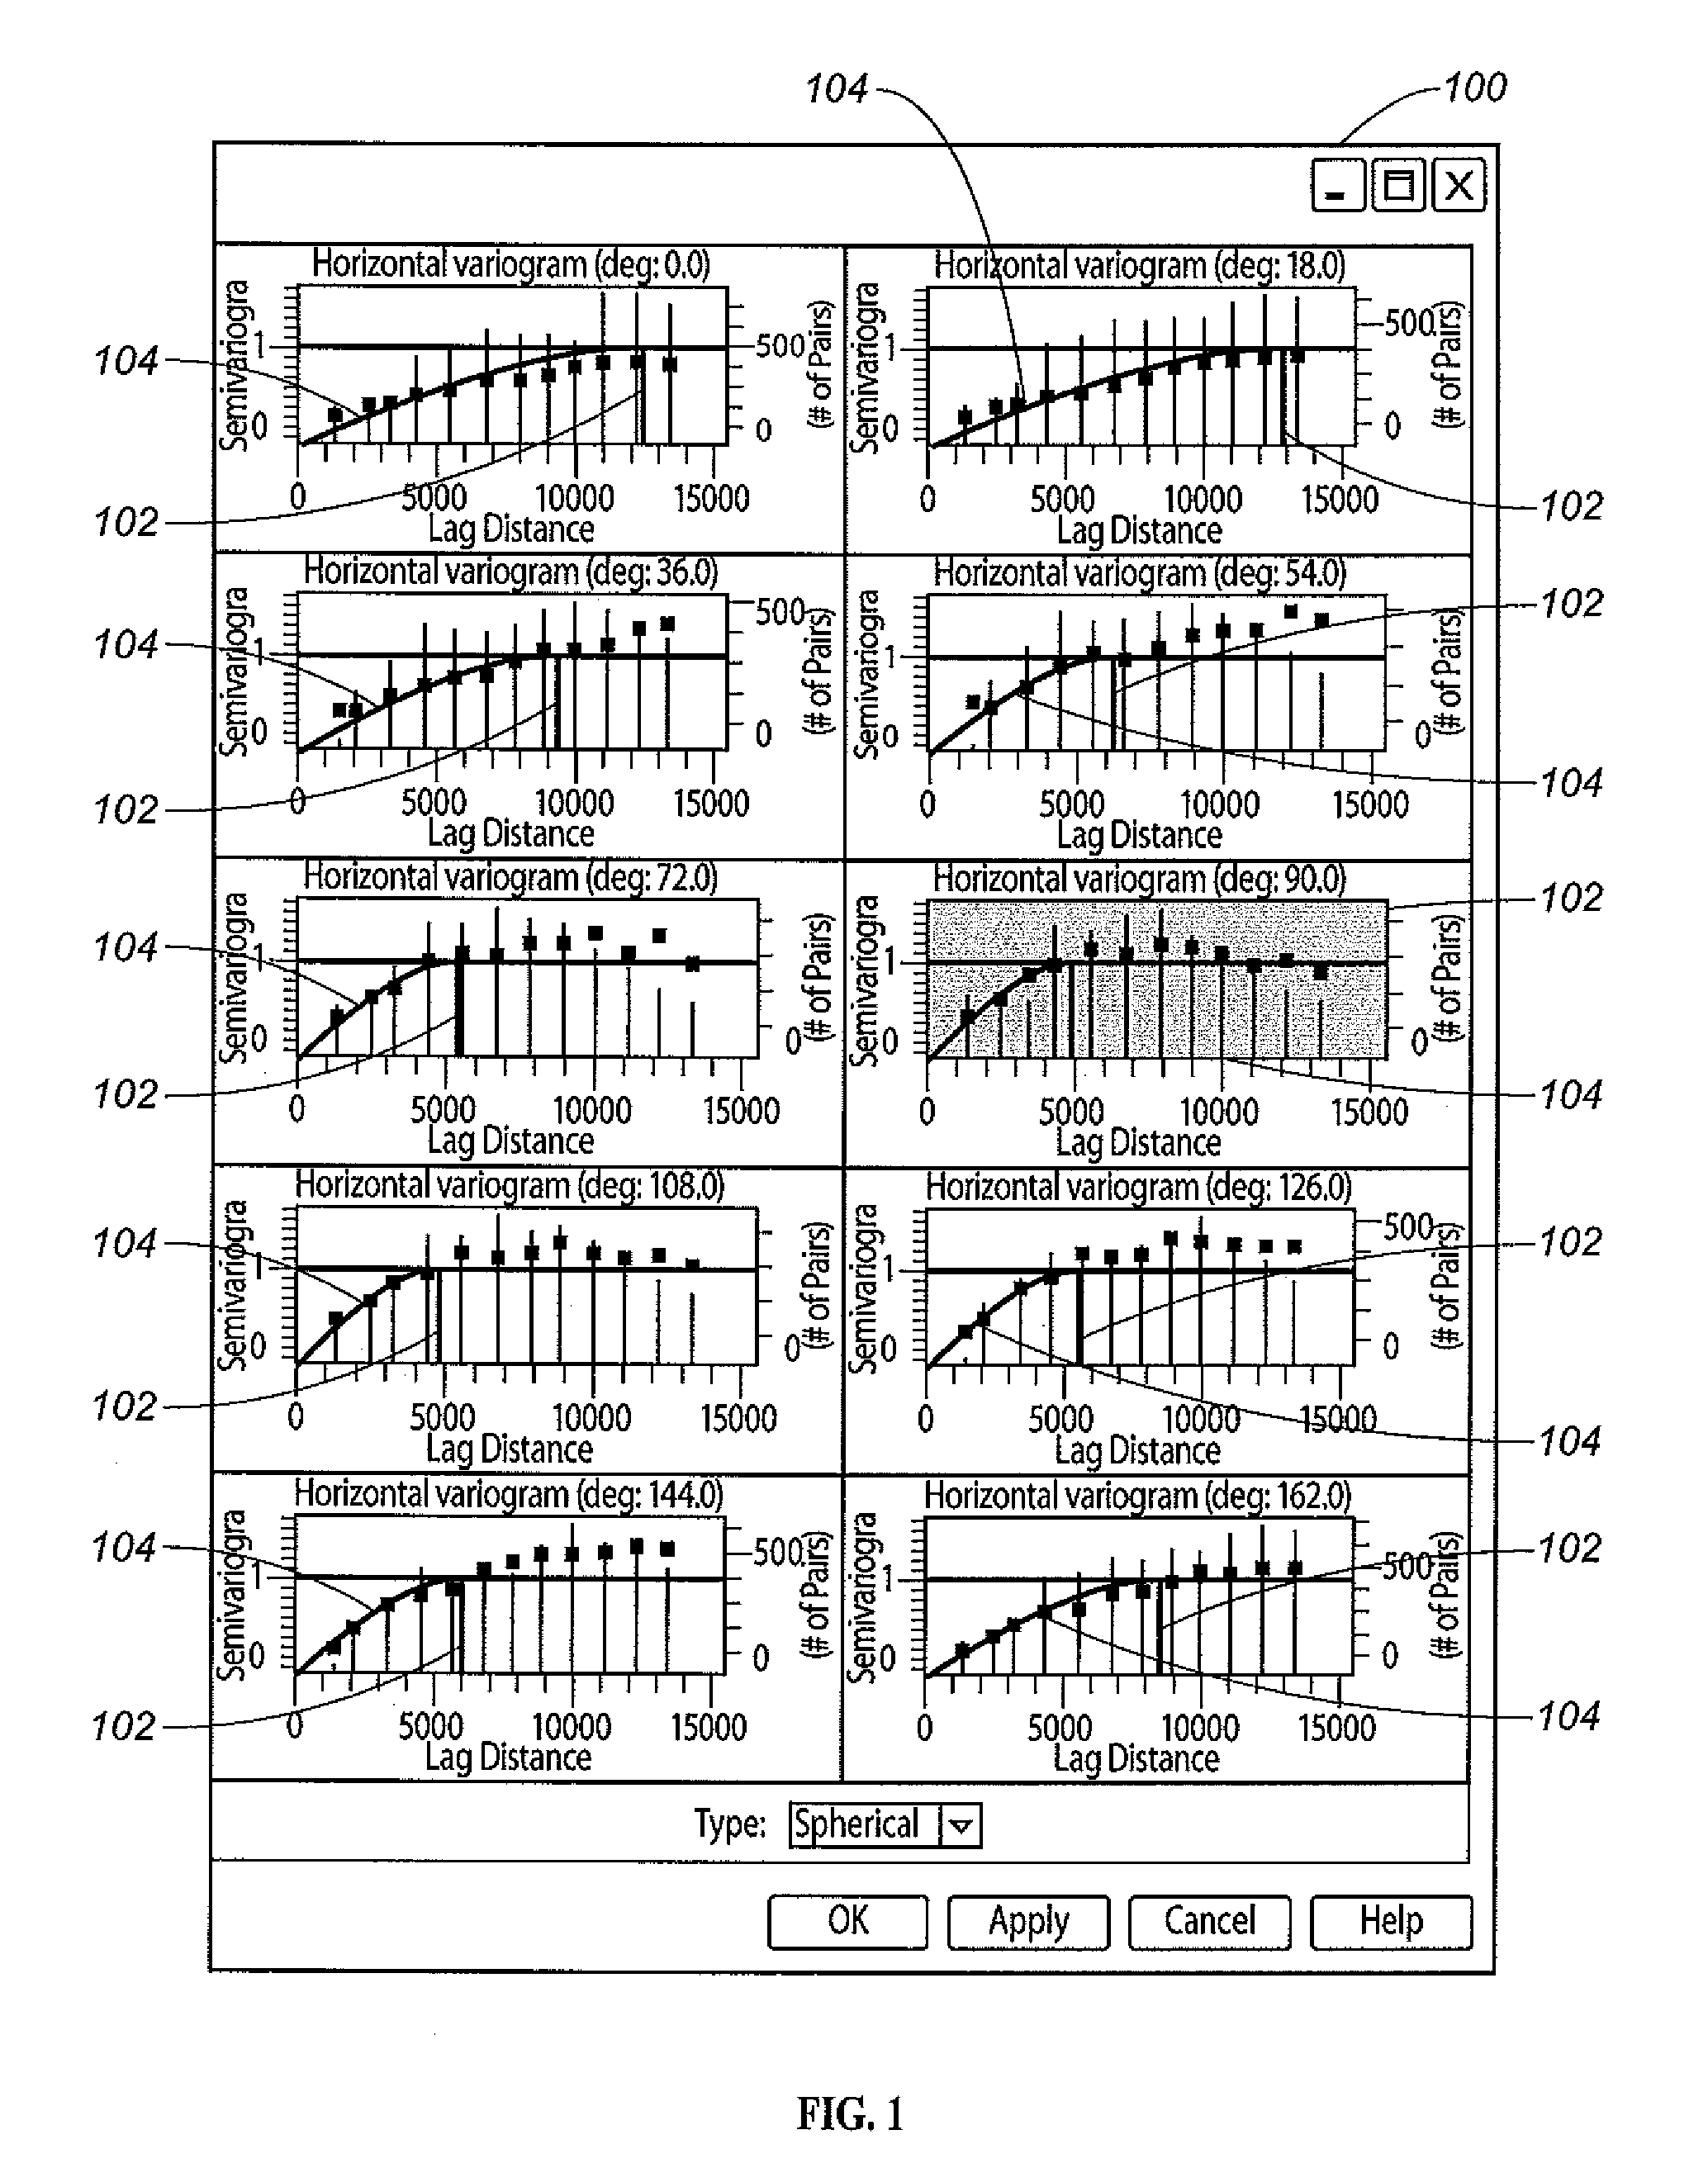 Systems and Methods for Computing and Validating a Variogram Model